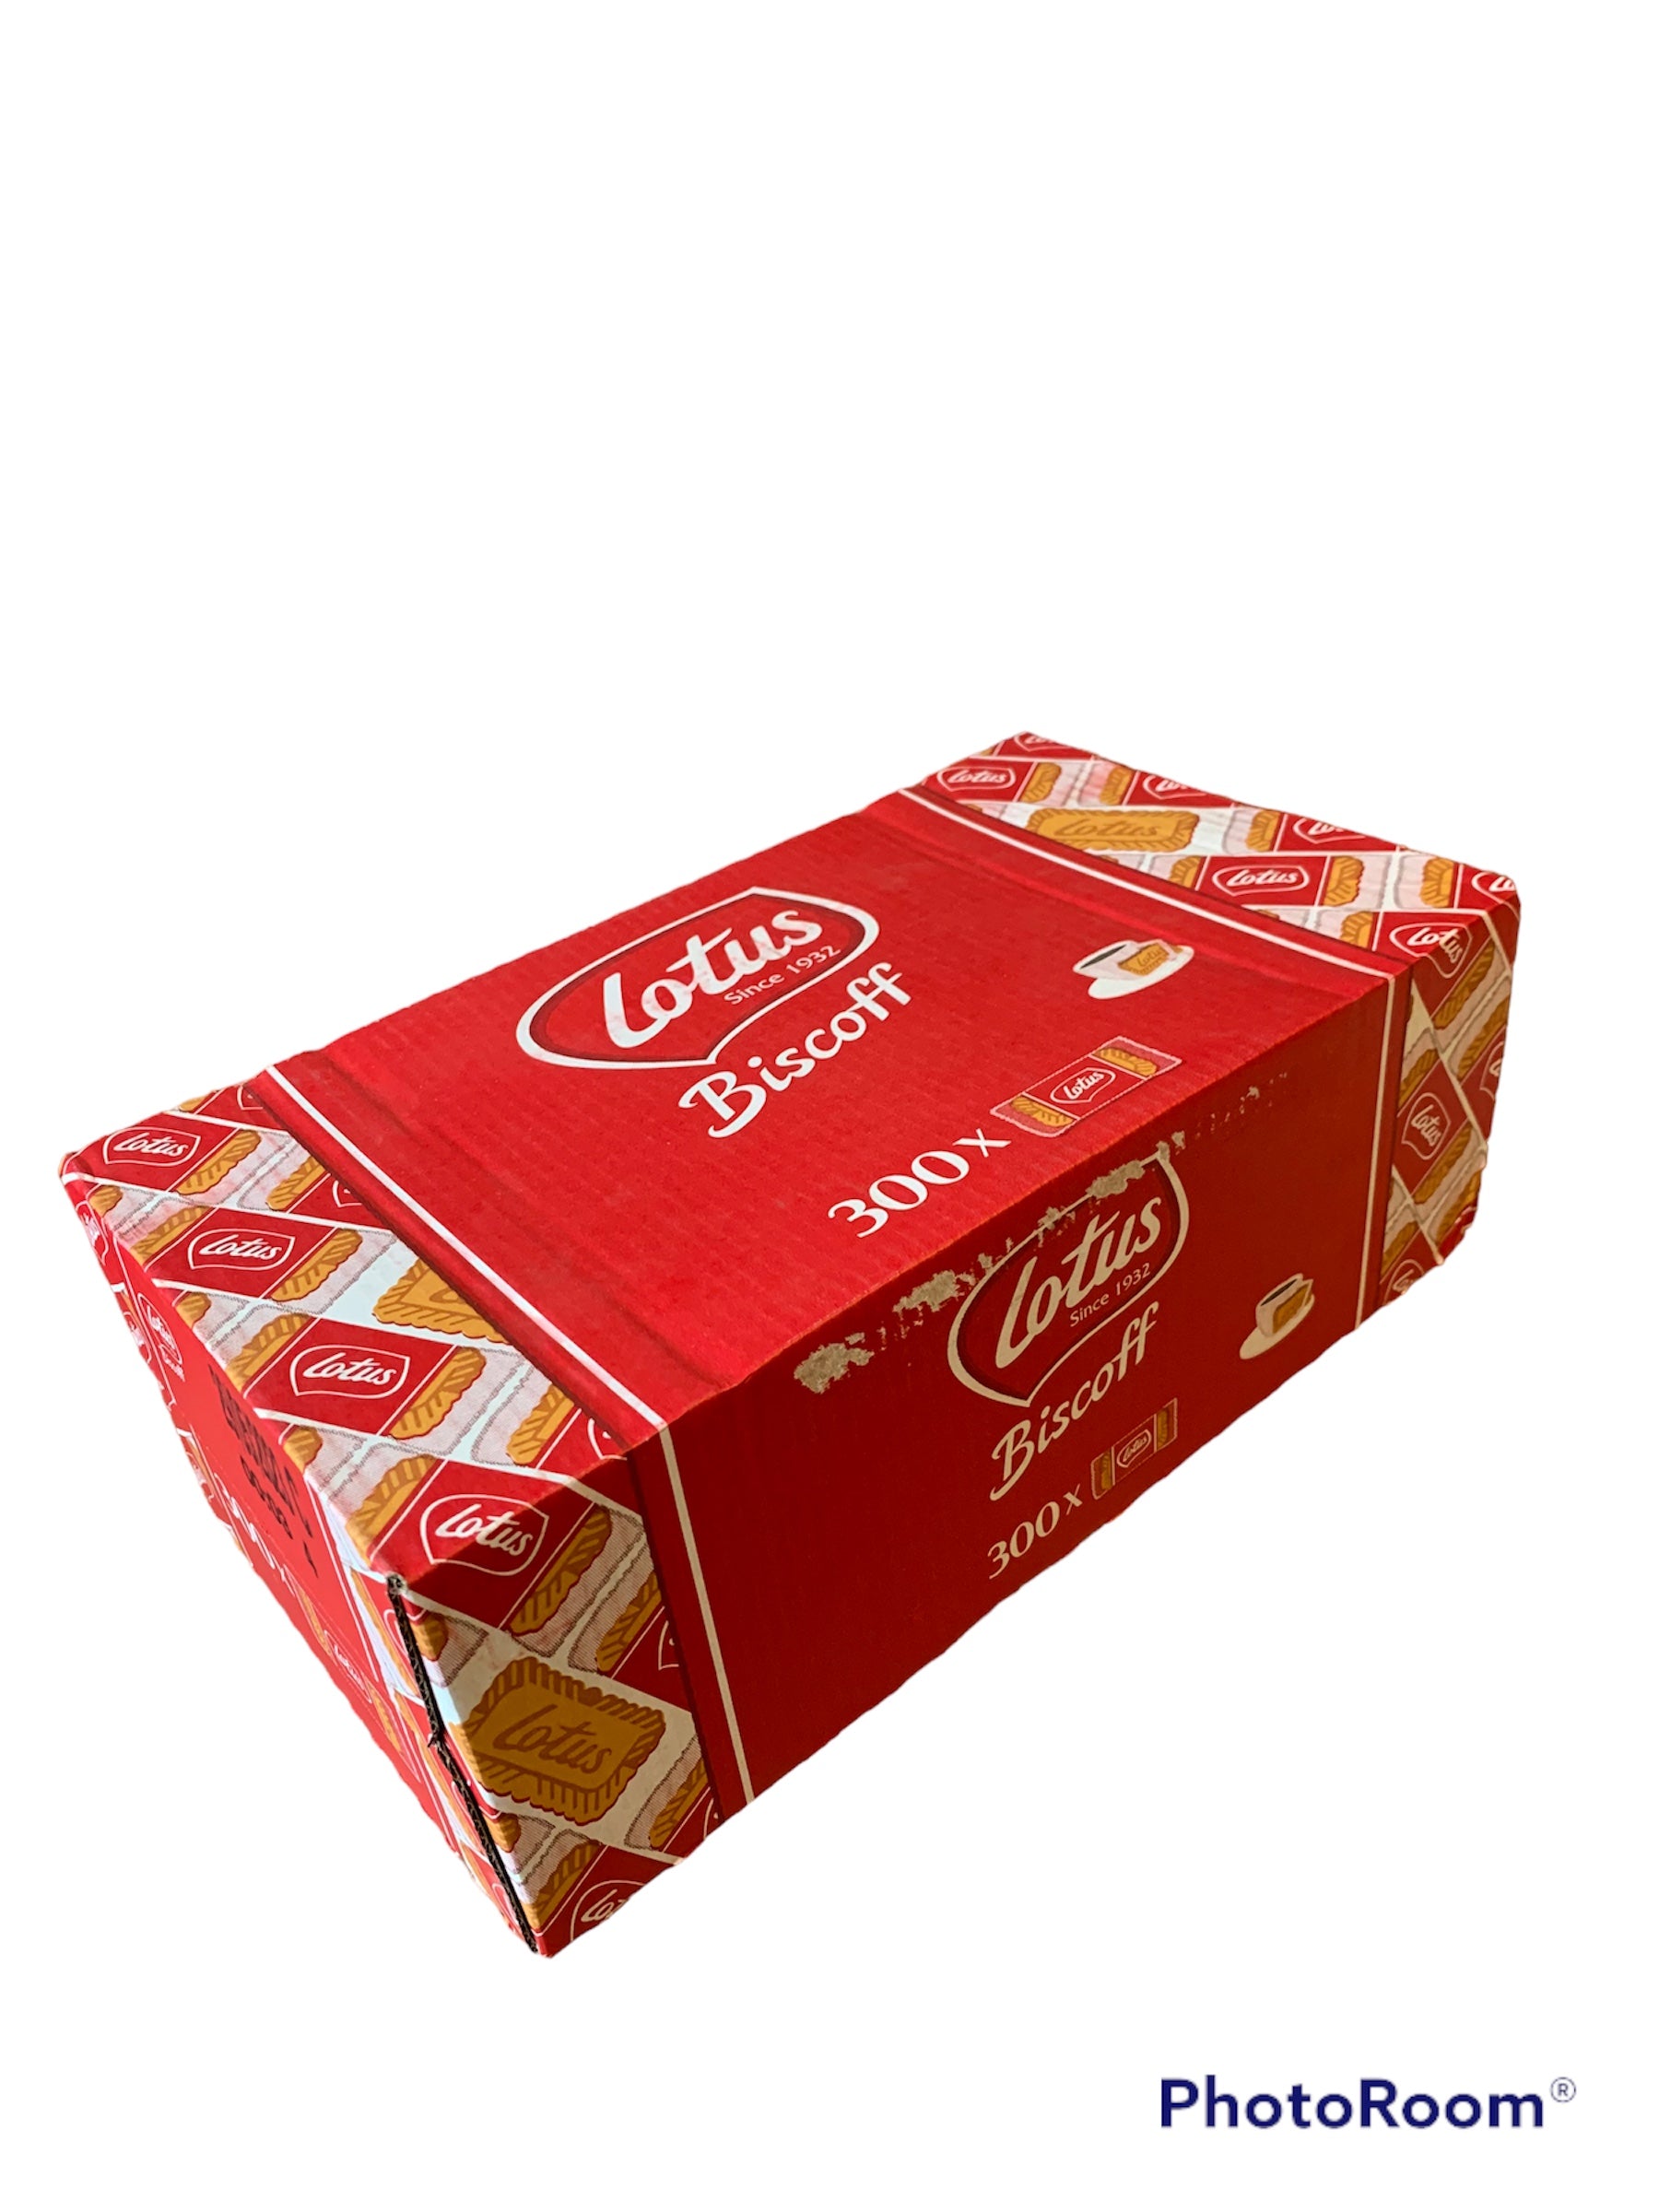 Lotus Biscoff Caramelised Biscuits Individually Wrapped x 300